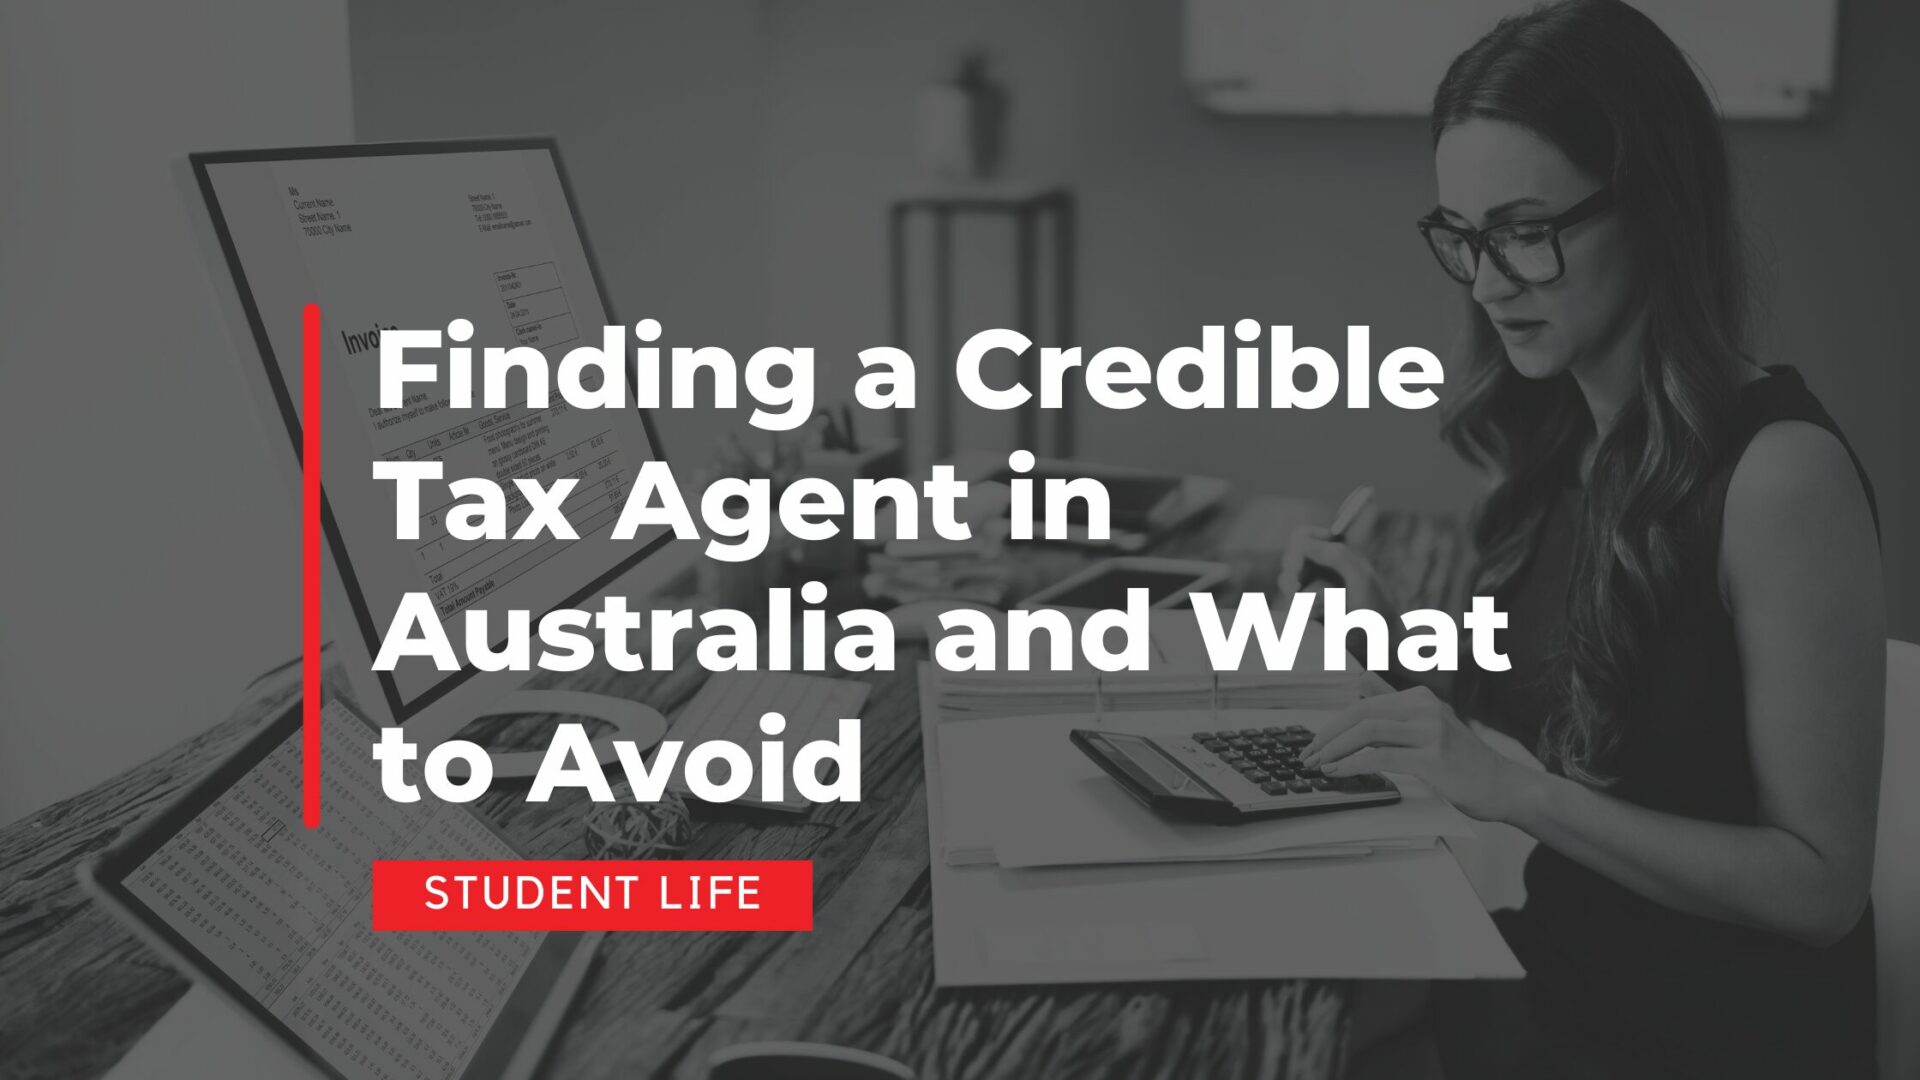 Finding a Credible Tax Agent in Australia and What to Avoid